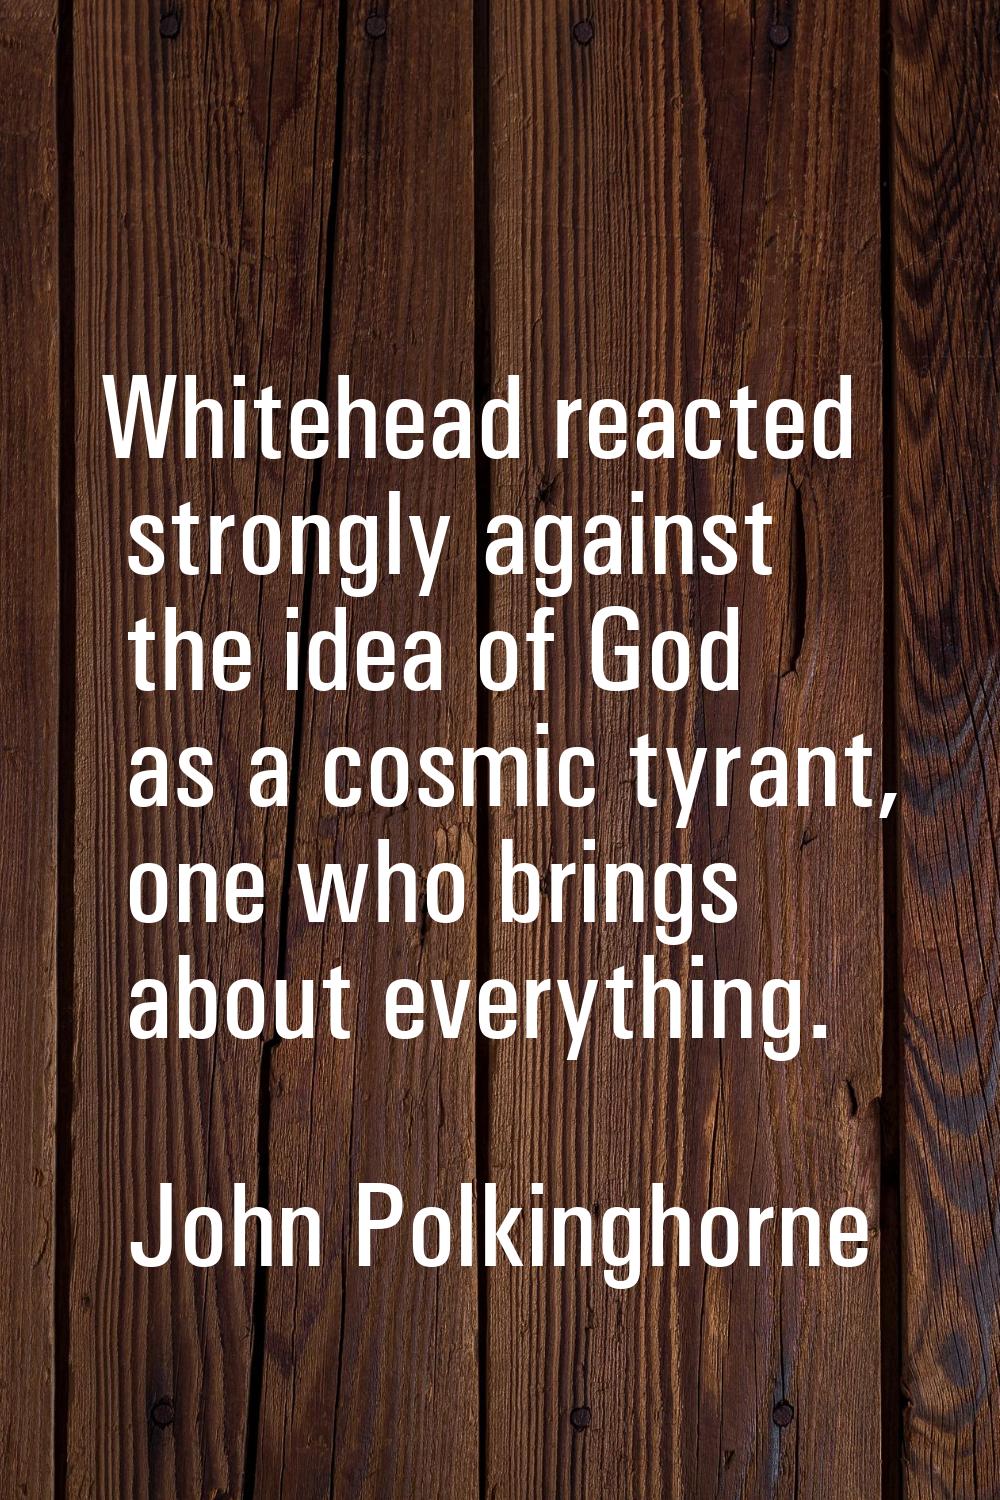 Whitehead reacted strongly against the idea of God as a cosmic tyrant, one who brings about everyth